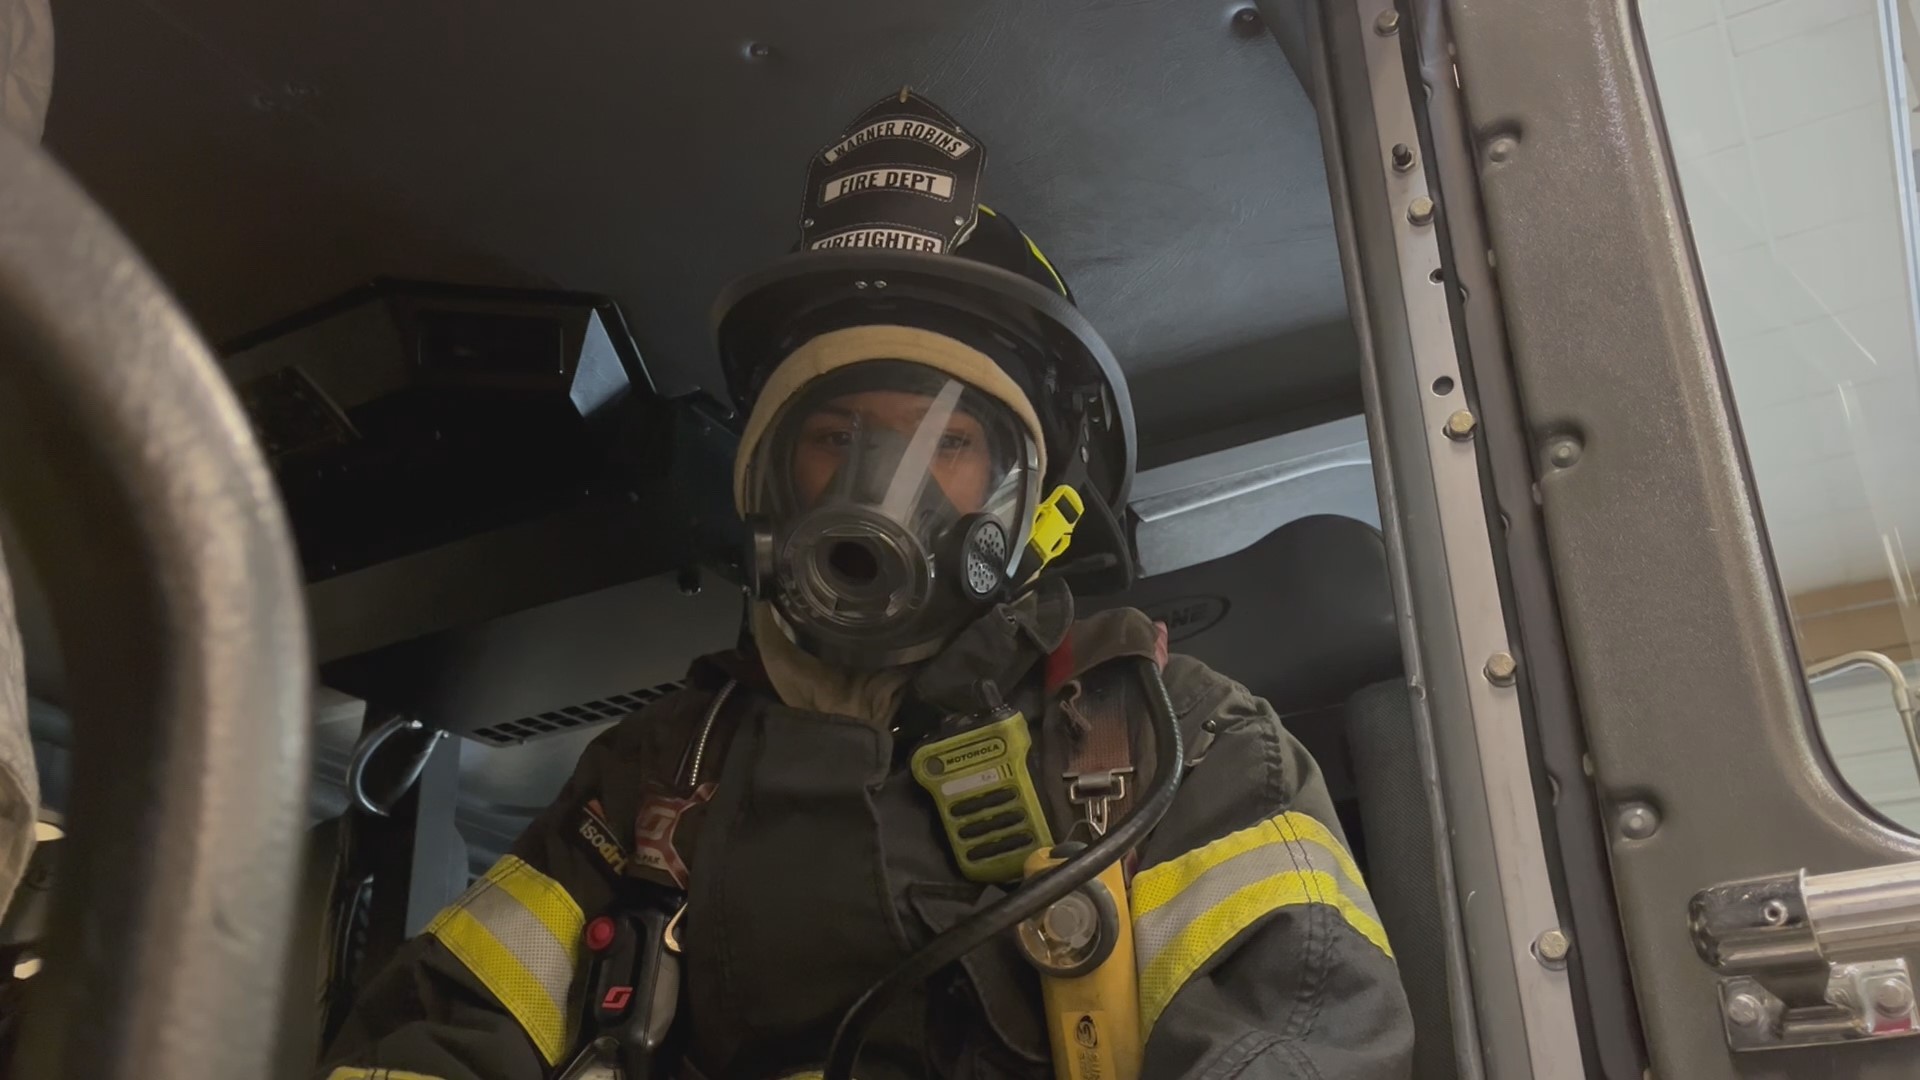 The department is about 27 firefighters short, but they expect to bring in nine new hires soon. This policy allows them to have more people fill in each week.